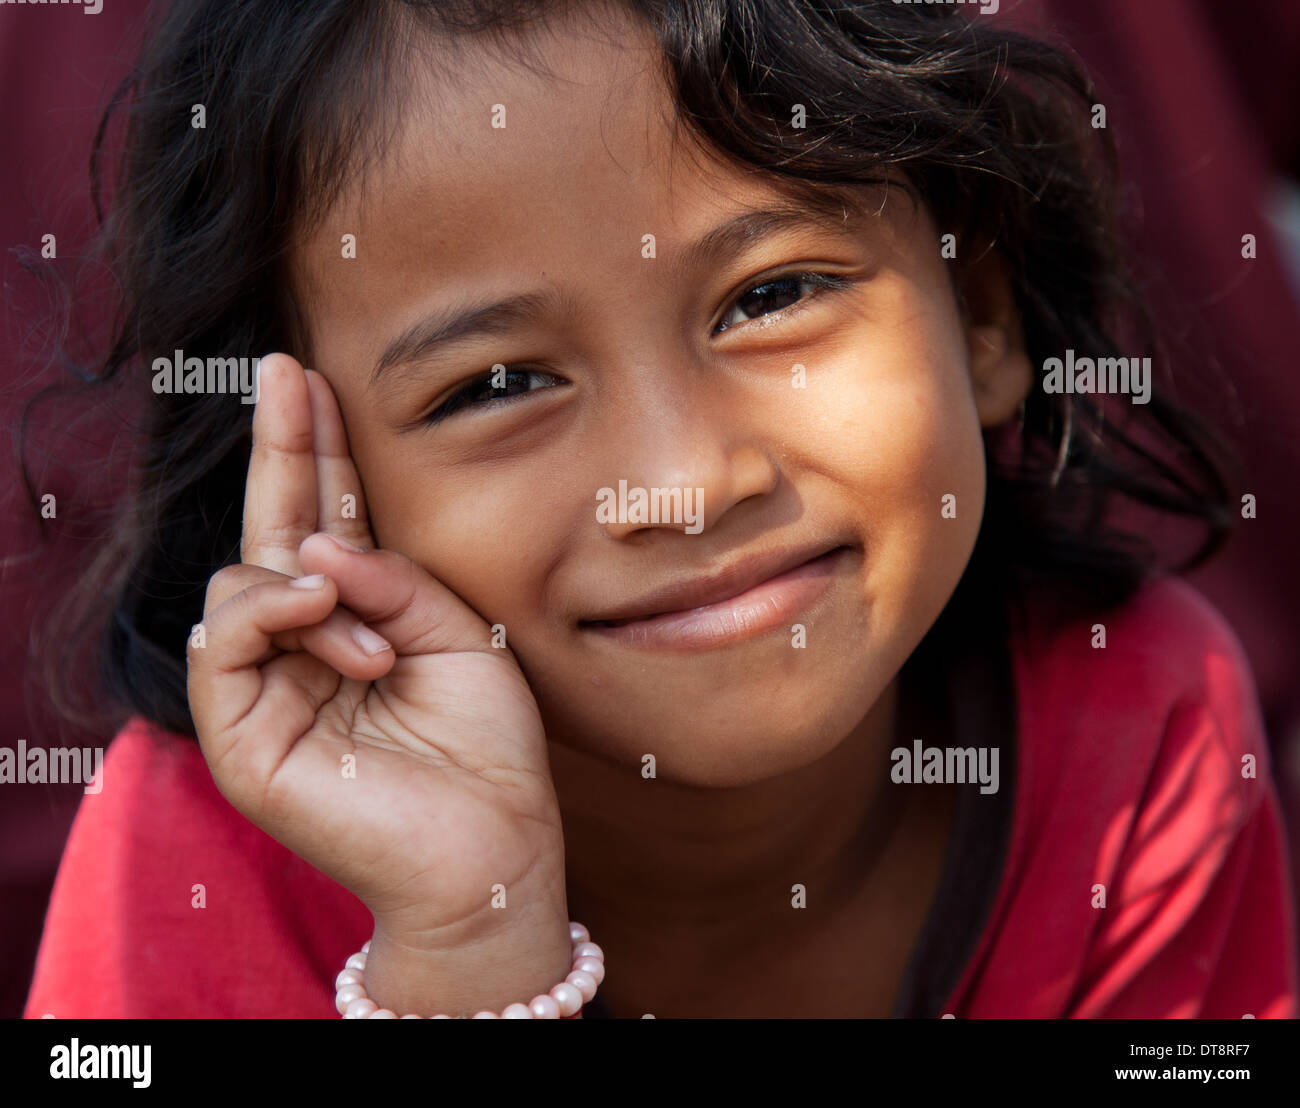 Smiling Cambodian girl Banque D'Images